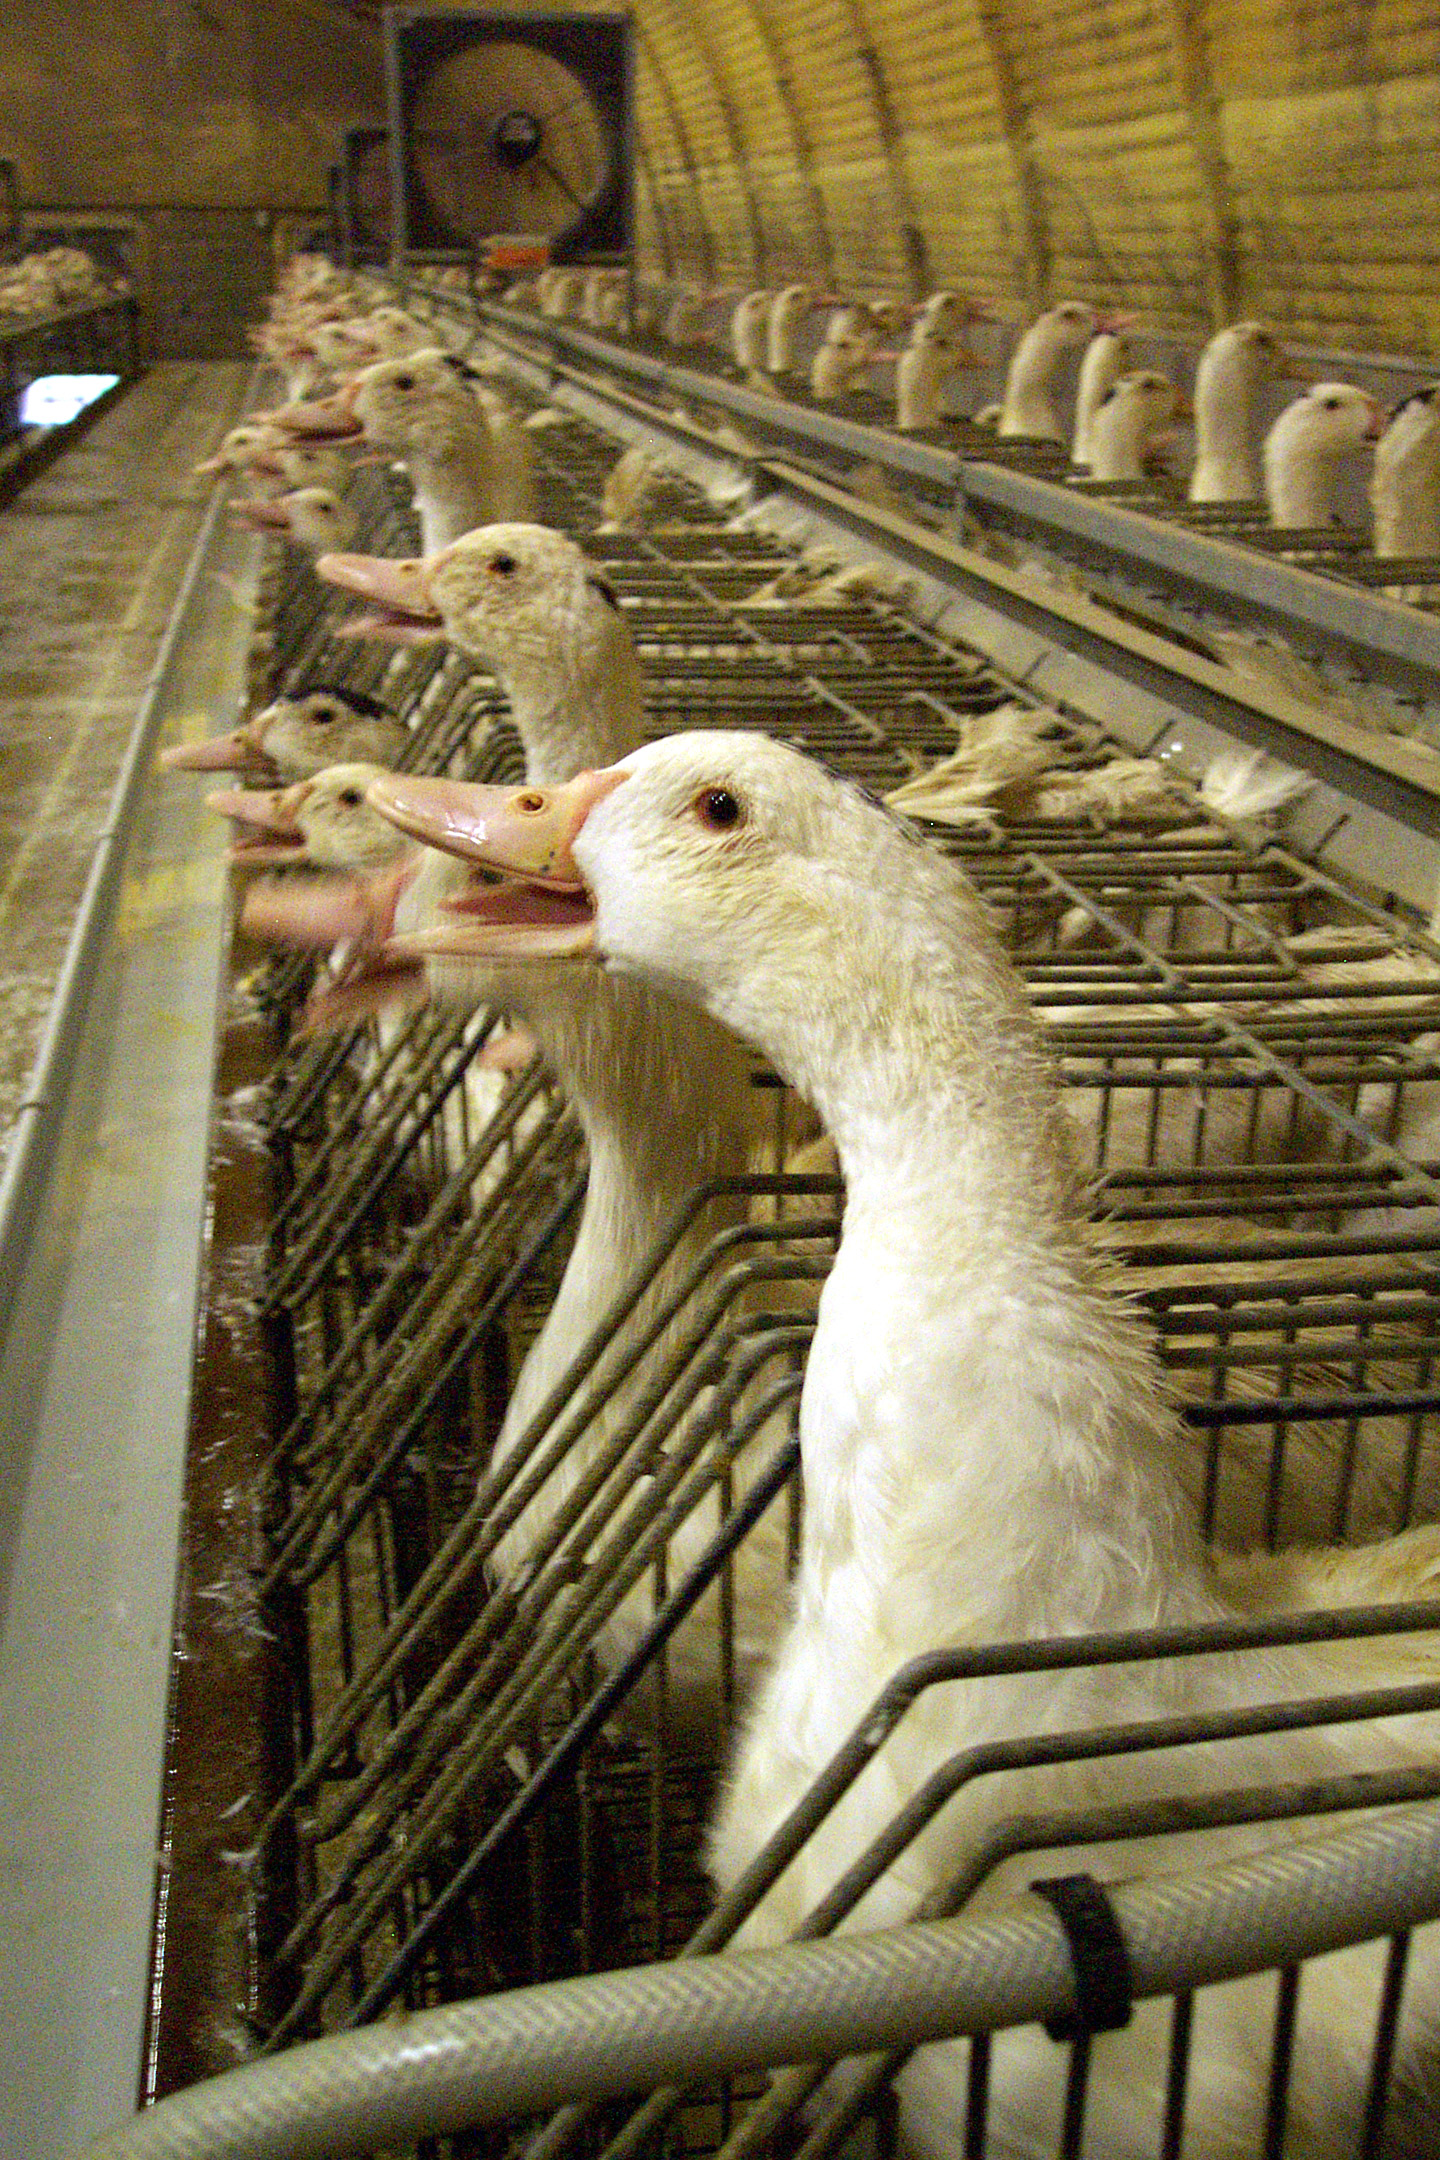 Geese used for foie gras